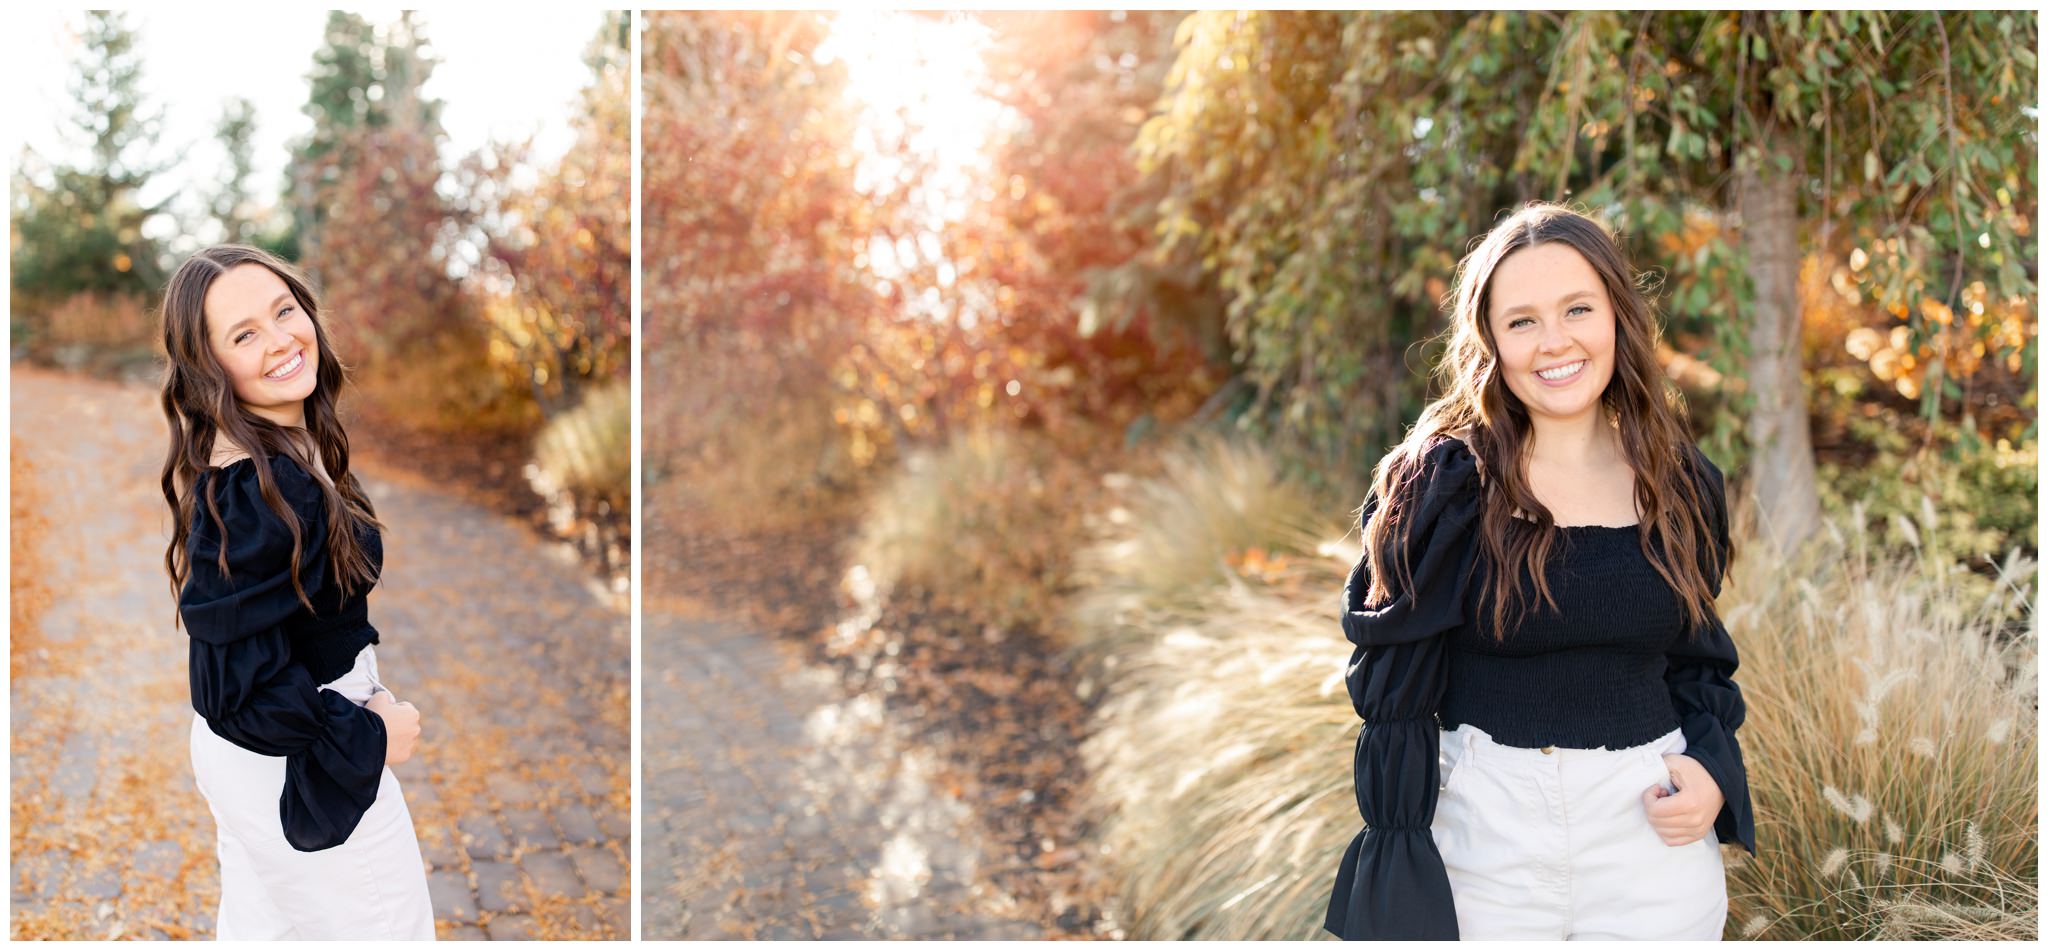 Idaho Falls and Rexburg senior pictures in the fall time